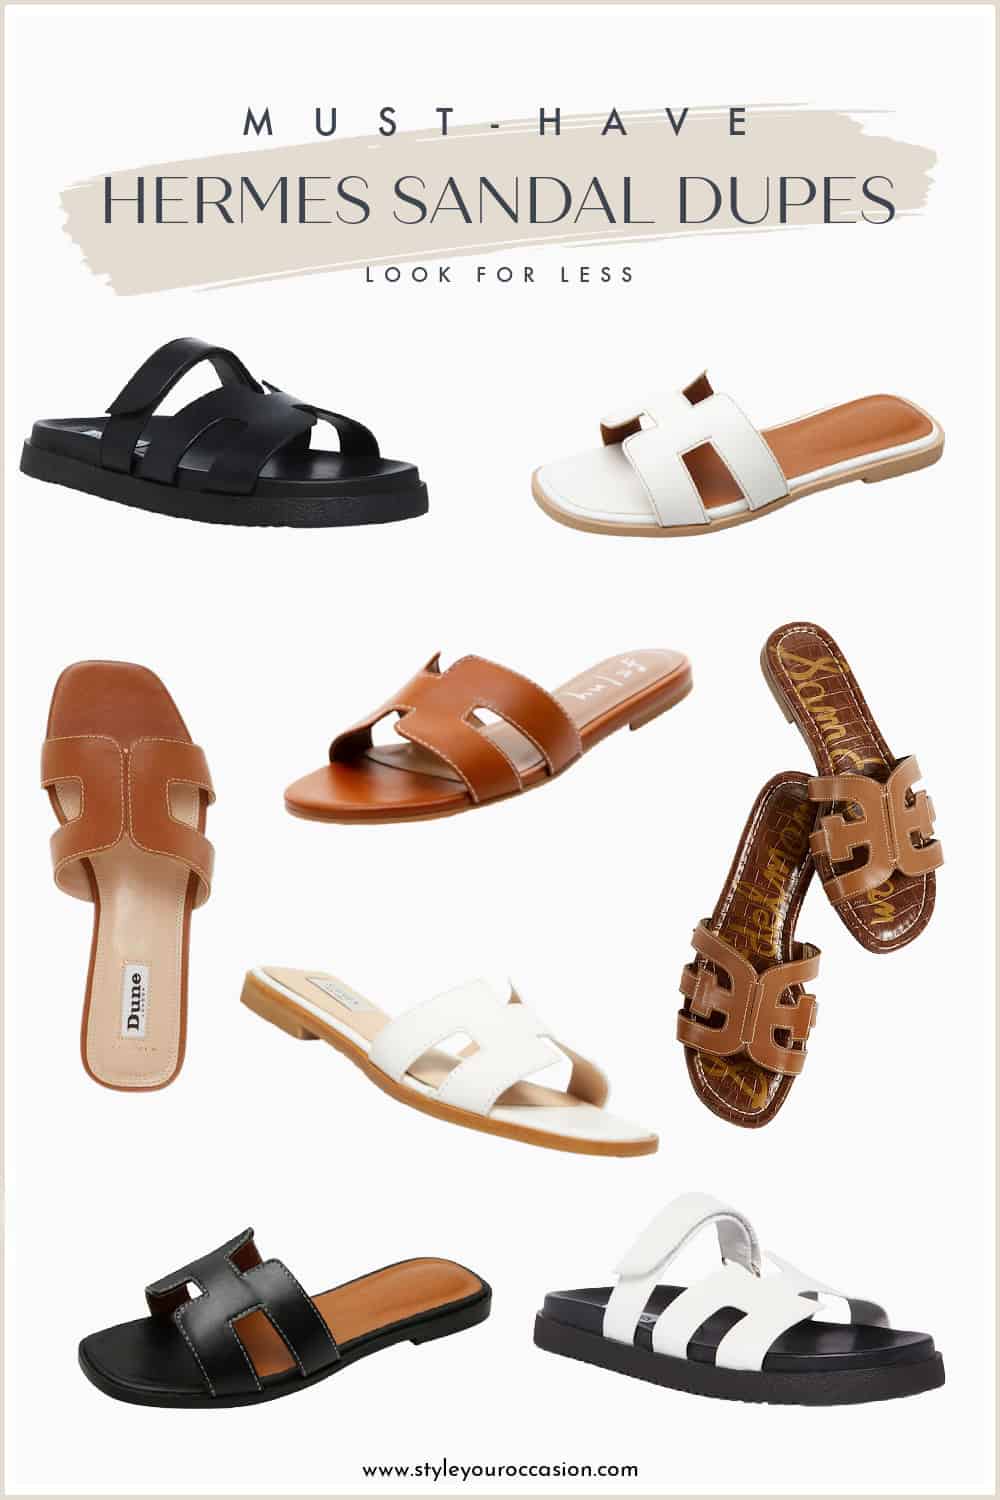 2023* 7+ Must-See Hermes Sandal Dupes: A Chic Look For Less